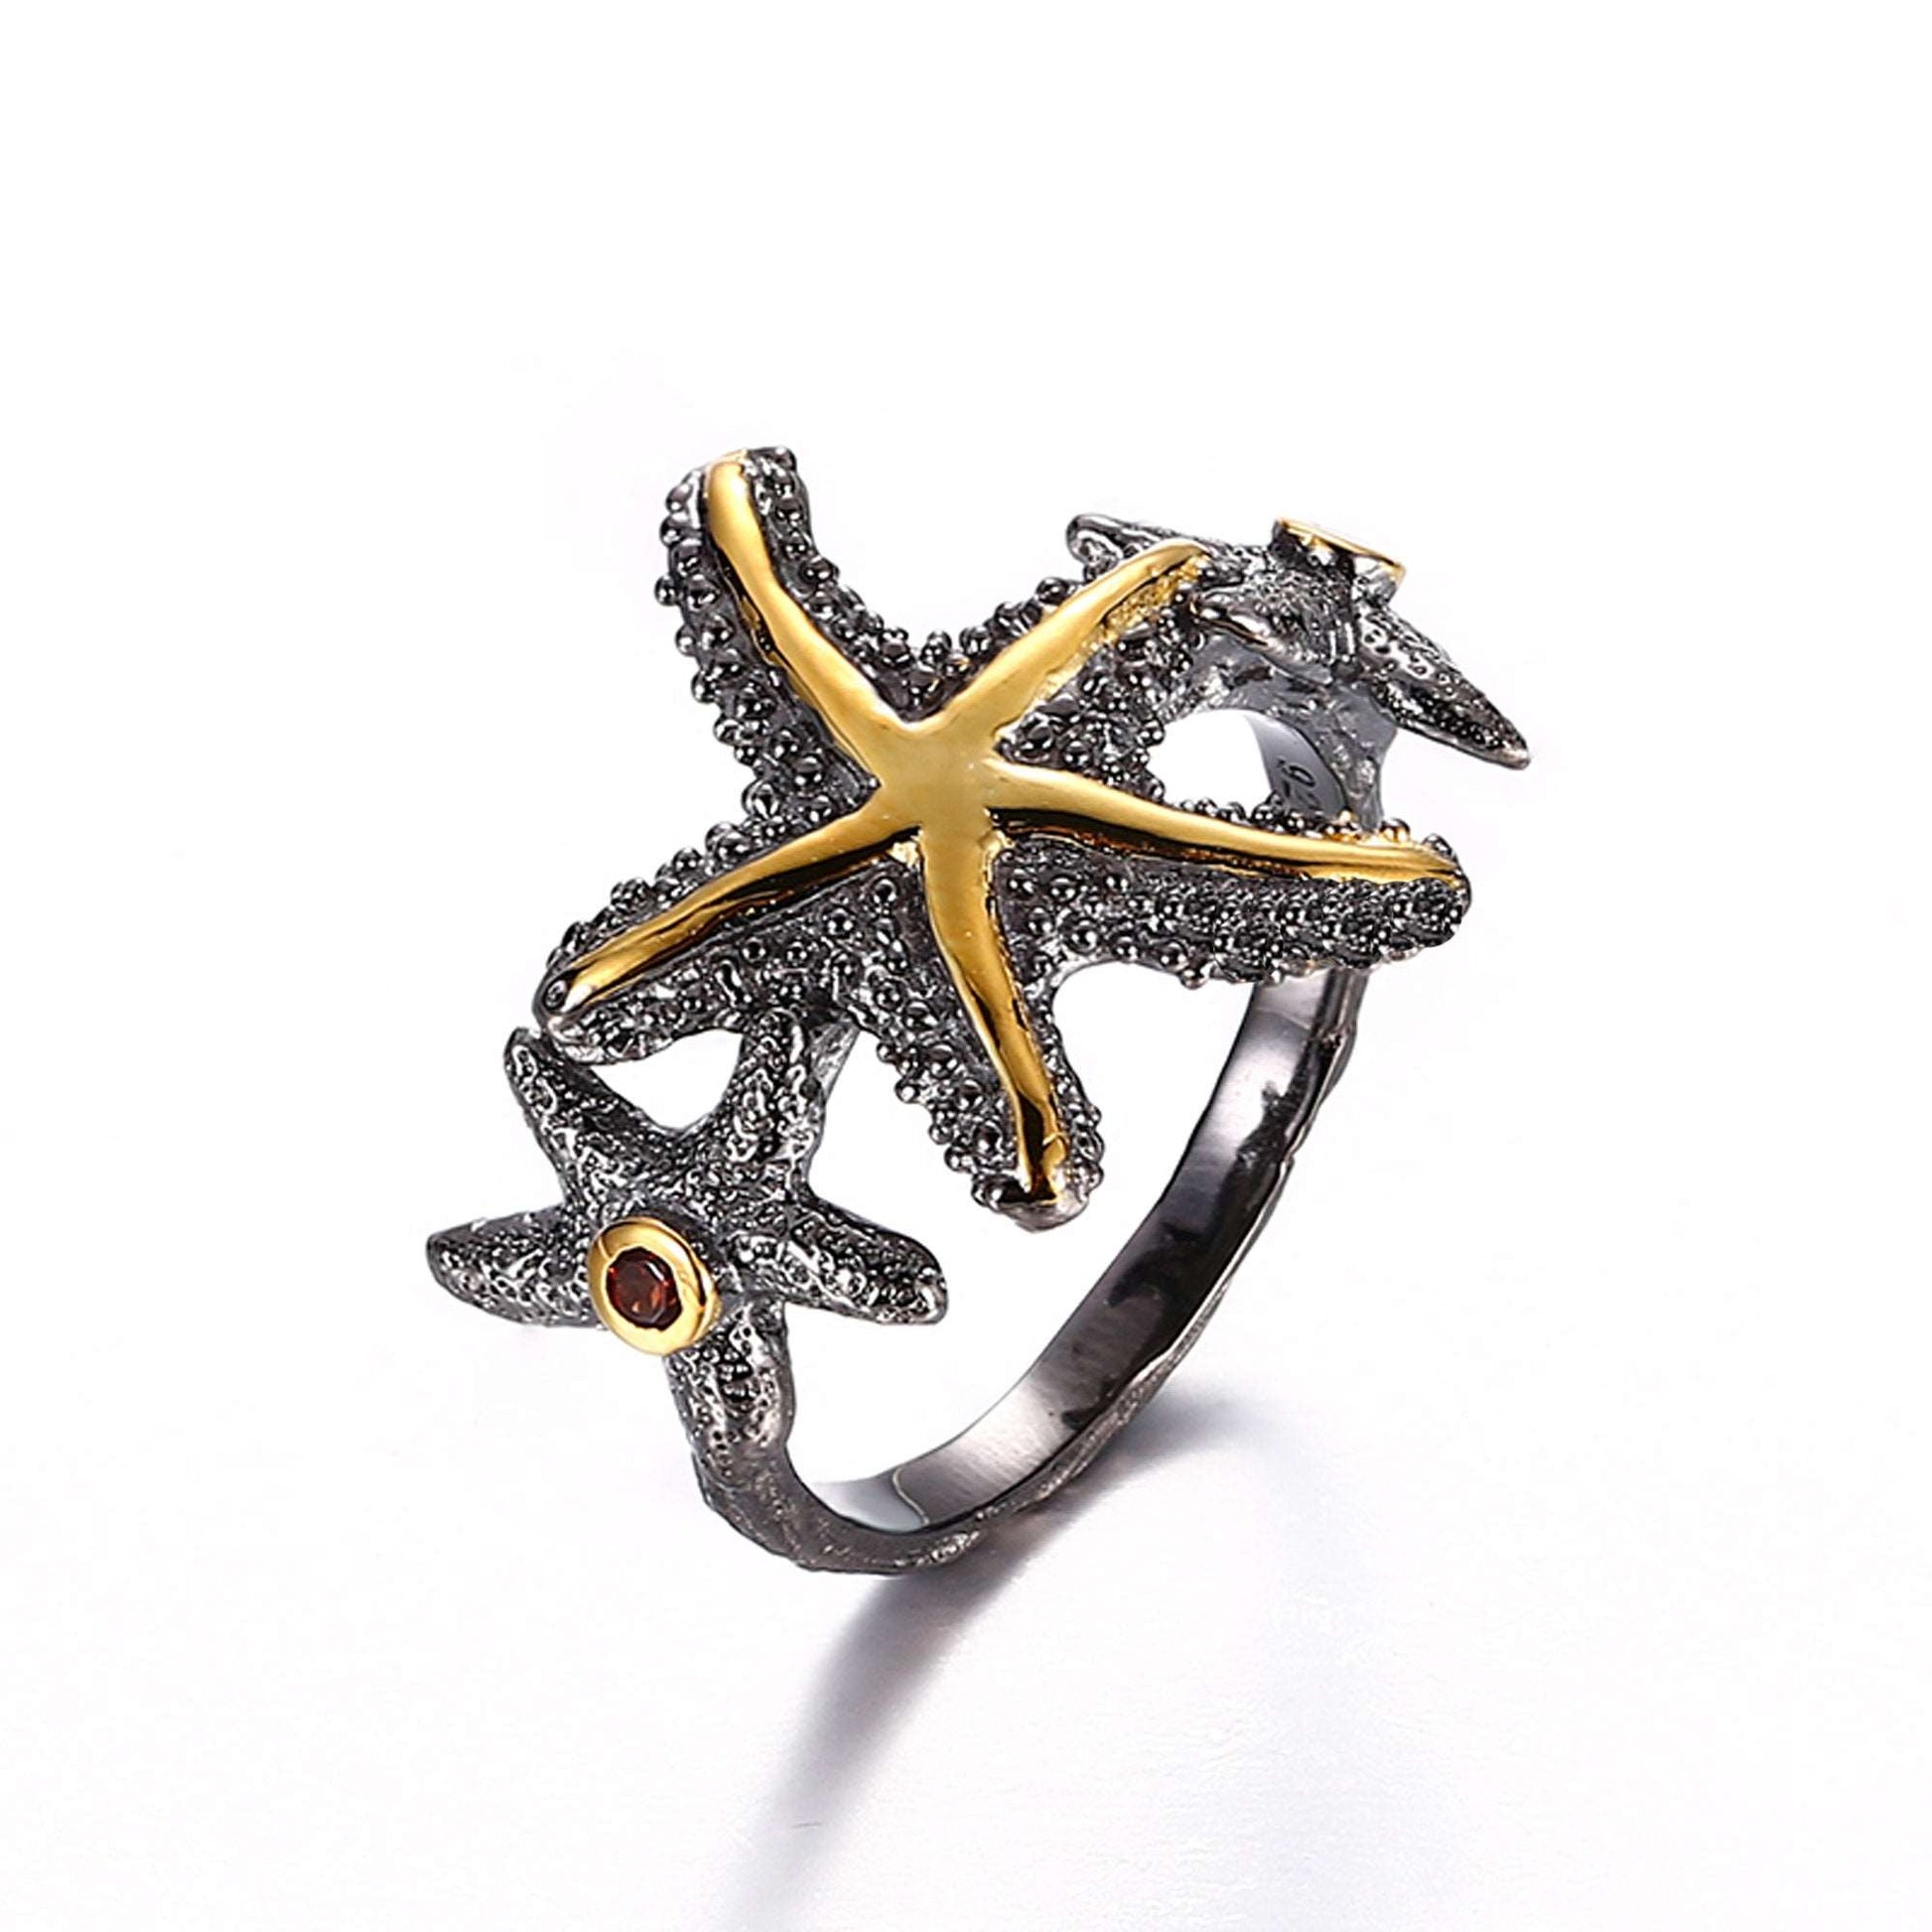 Handcrafted sterling silver starfish ring with 2 garnet gemstones on sides. - Providence silver gold jewelry usa